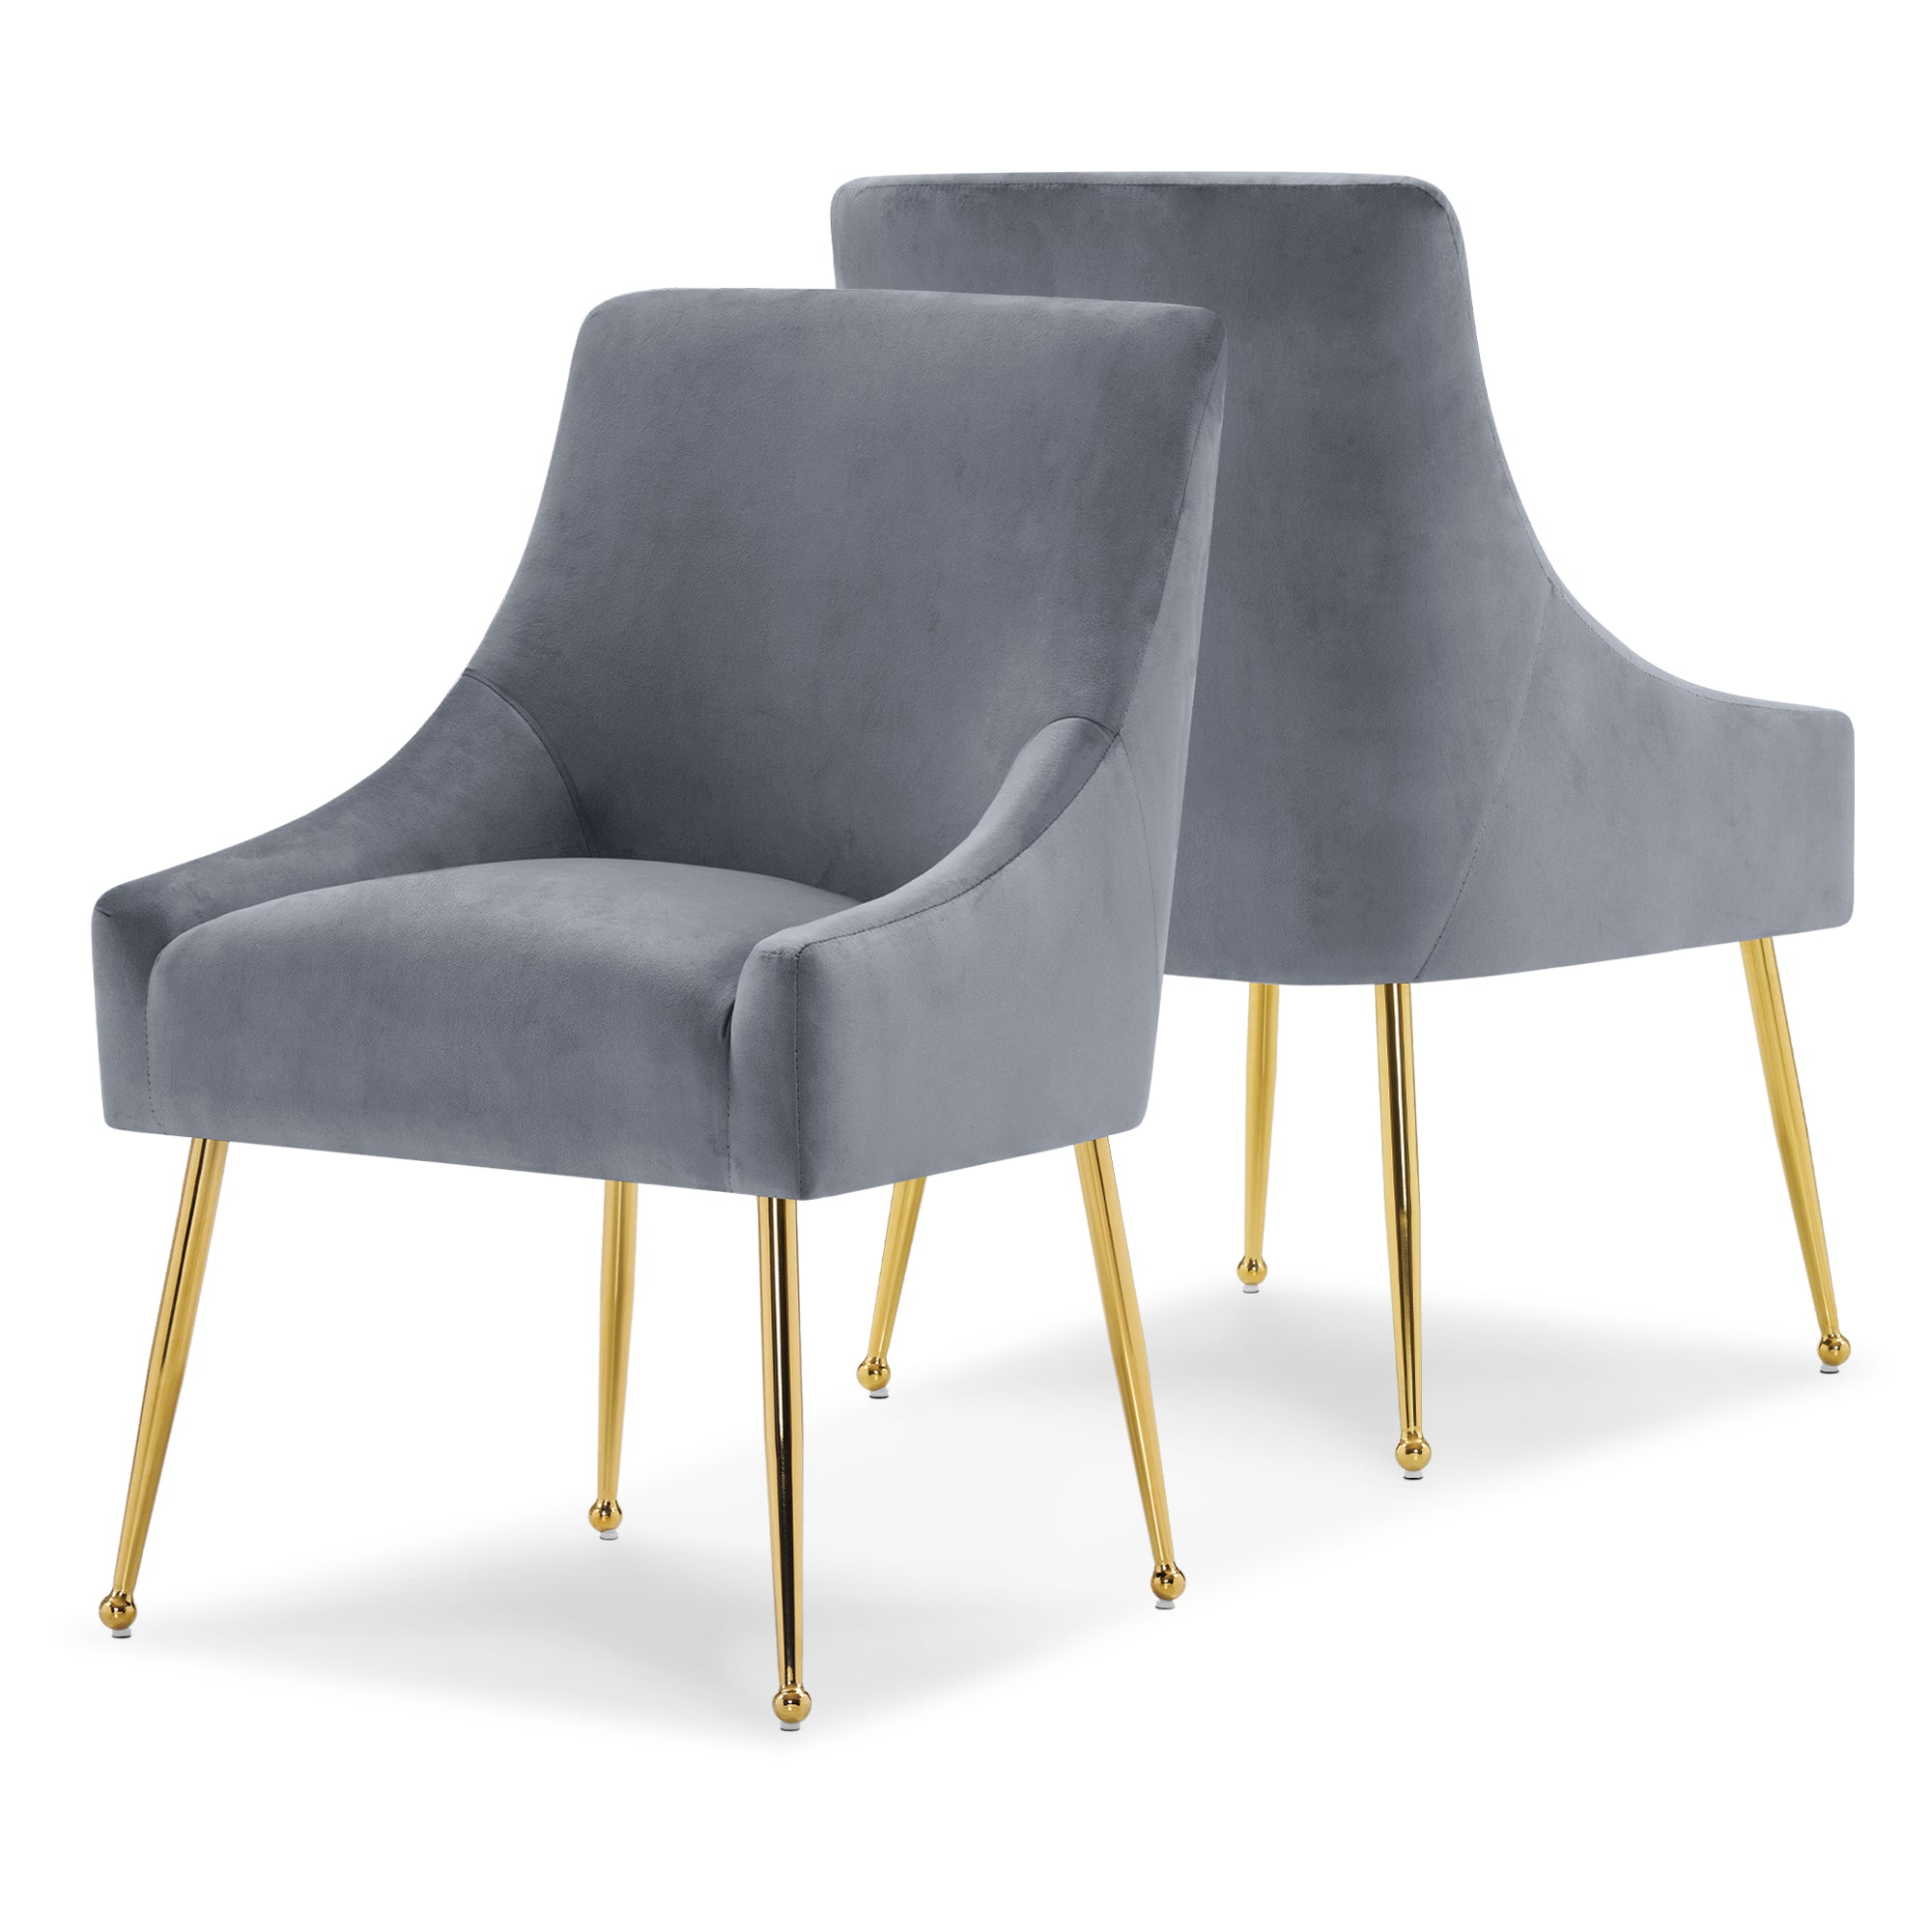 ivinta Modern Dining Chair Set of 2, Yellow Velvet Upholstered Dining Chair with Gold Legs